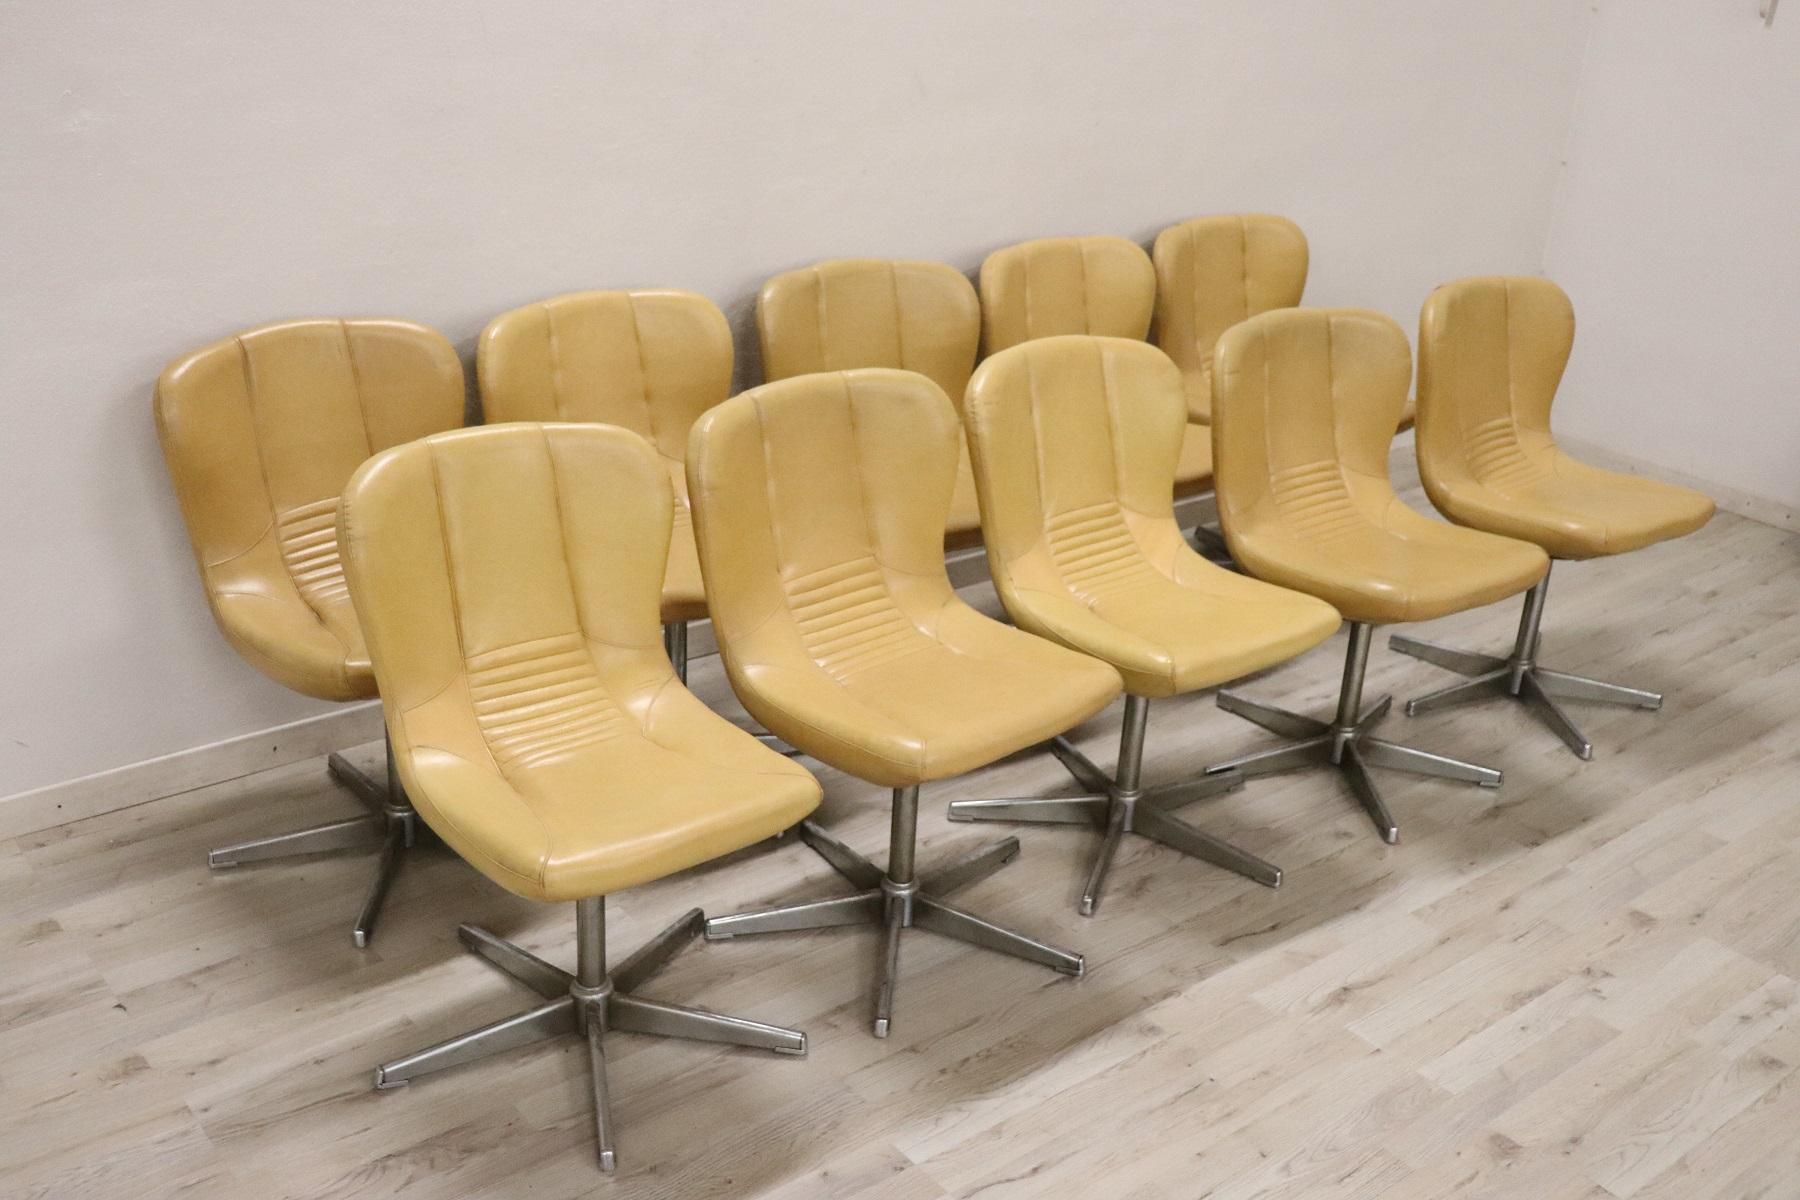 Beautiful and rare series of ten Italian design armchairs or chairs from the 1960s. Made with a chromed metal pedestal, the armchairs are swivel. Covered in used leather but in very good condition small signs of wear, only one armchair has a burn on